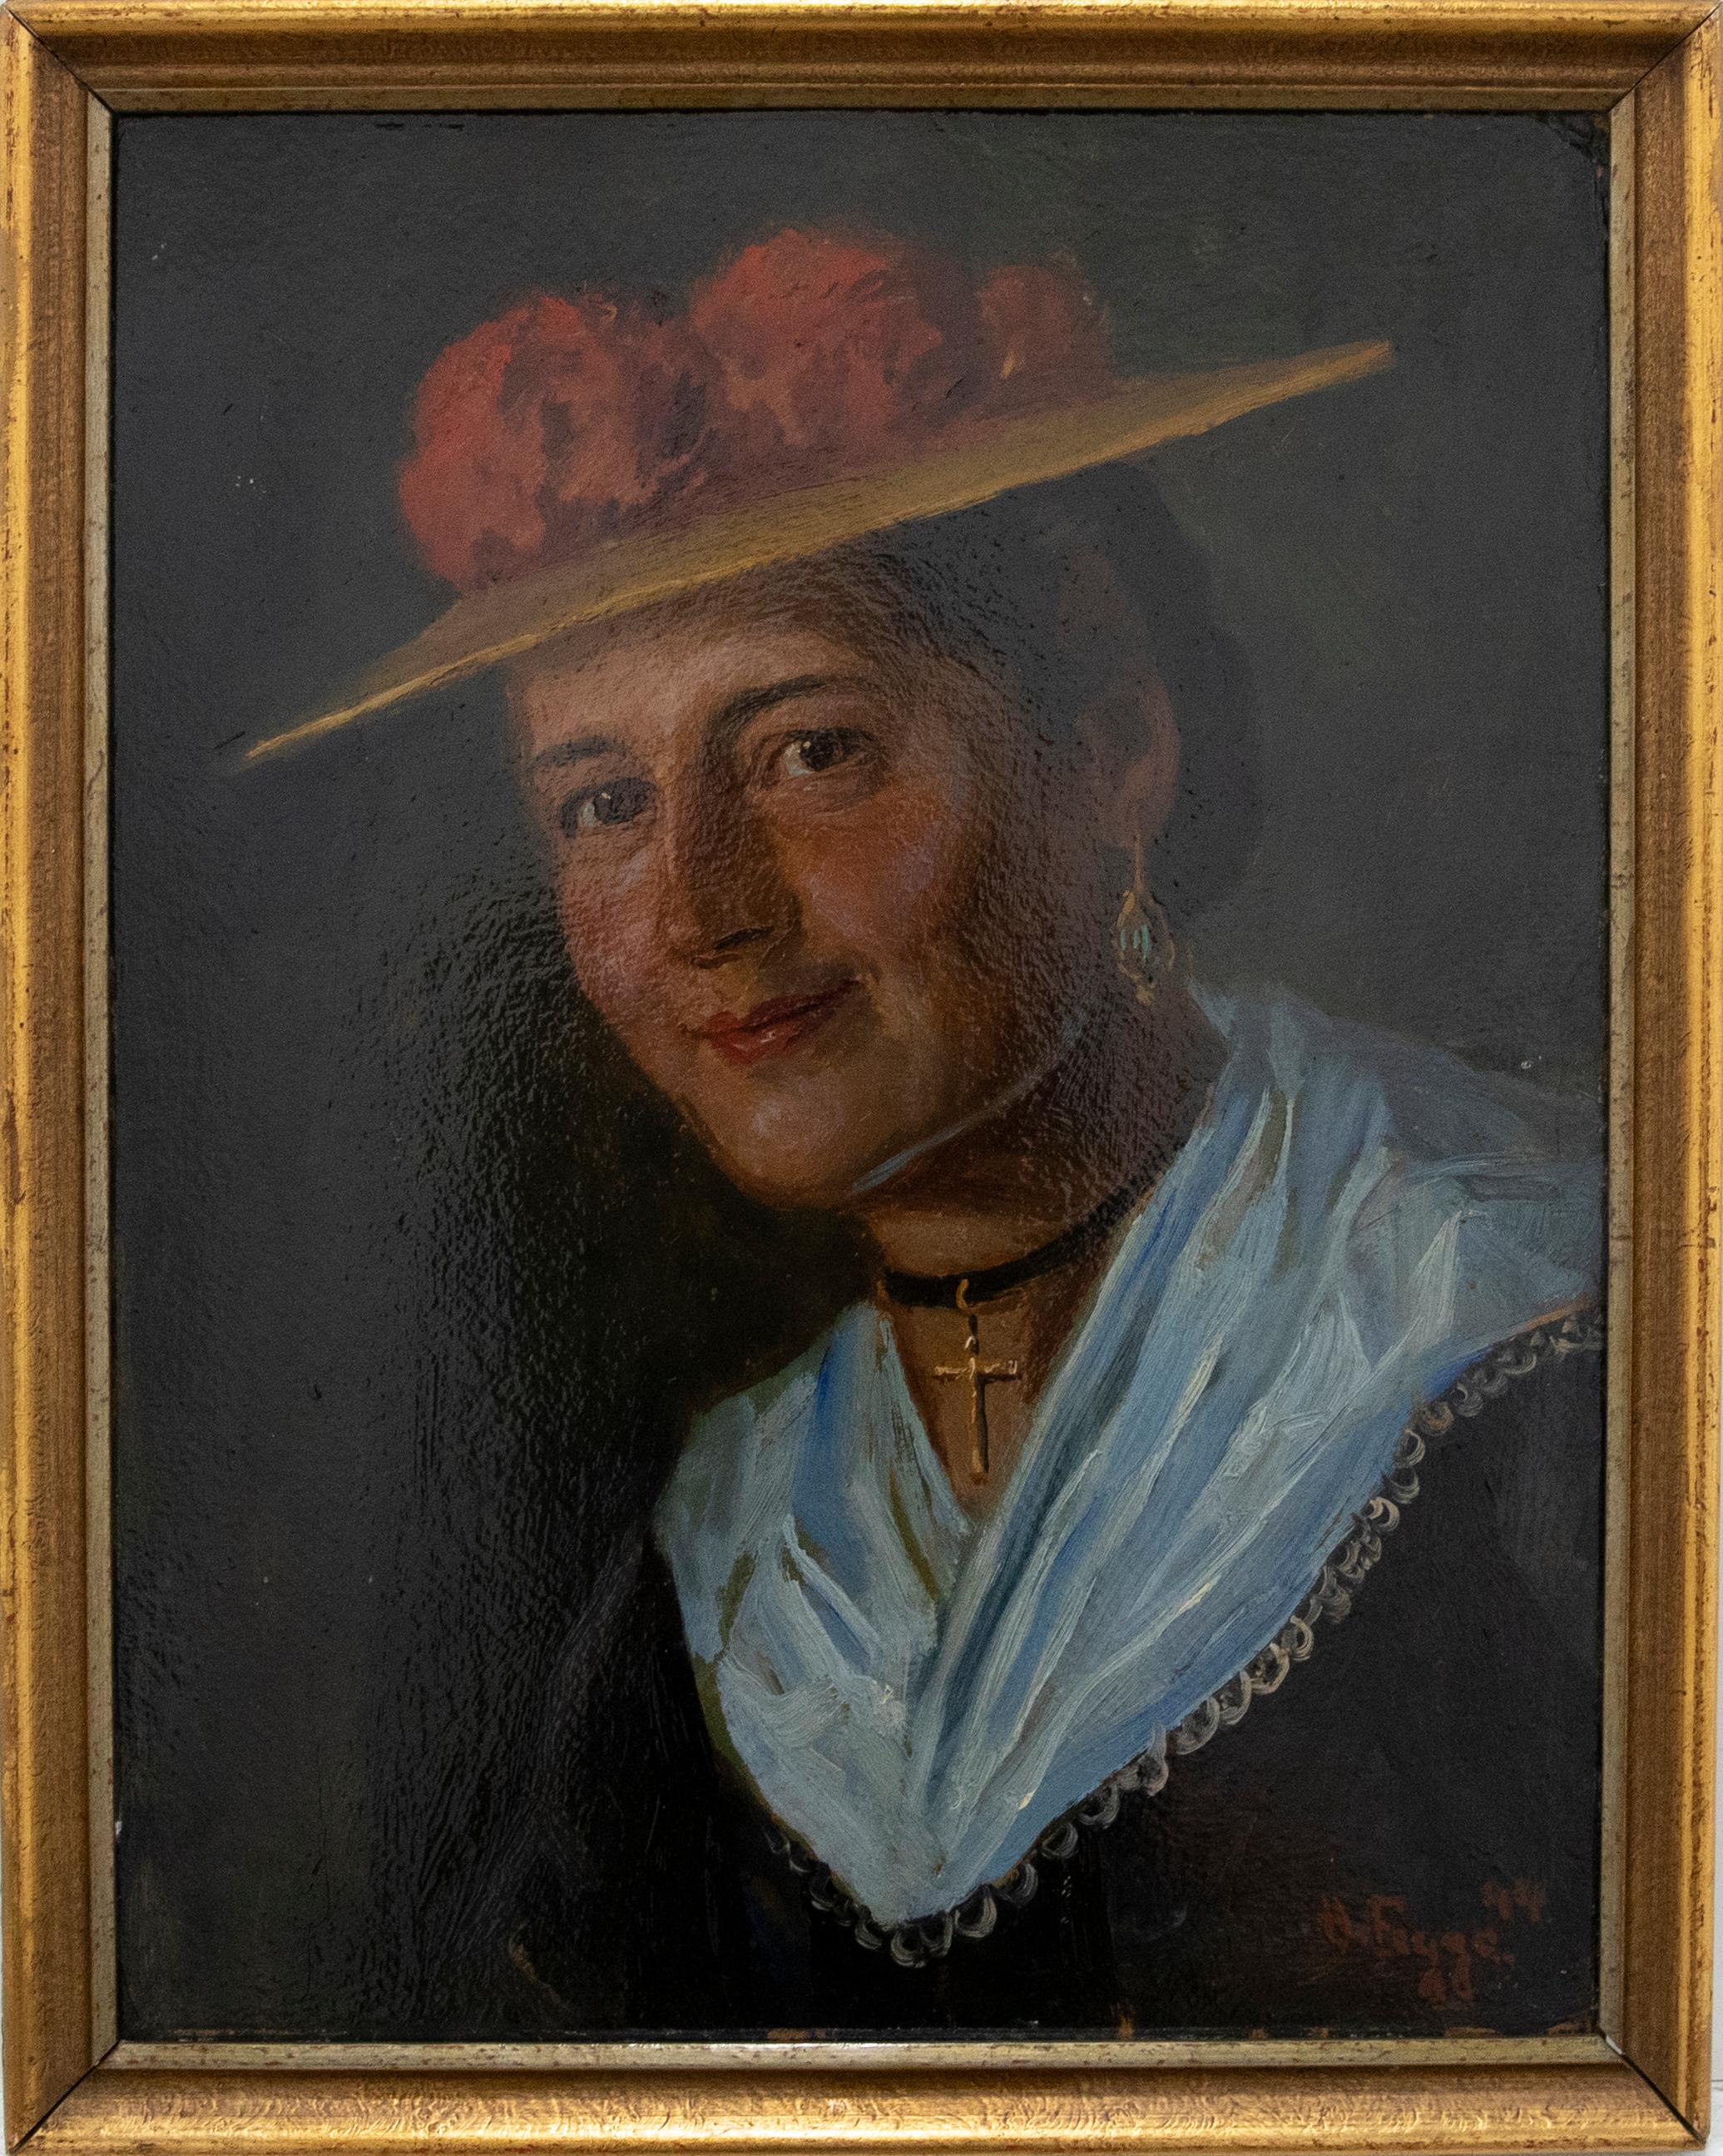 A joyous portrait of a lady wearing a floral hat and long black dress by German artist Hugo Figge. The sitter has been caught with a gentle smile, staring directly at the viewer. For the occasion the lady has accessorised her outfit with a beautiful